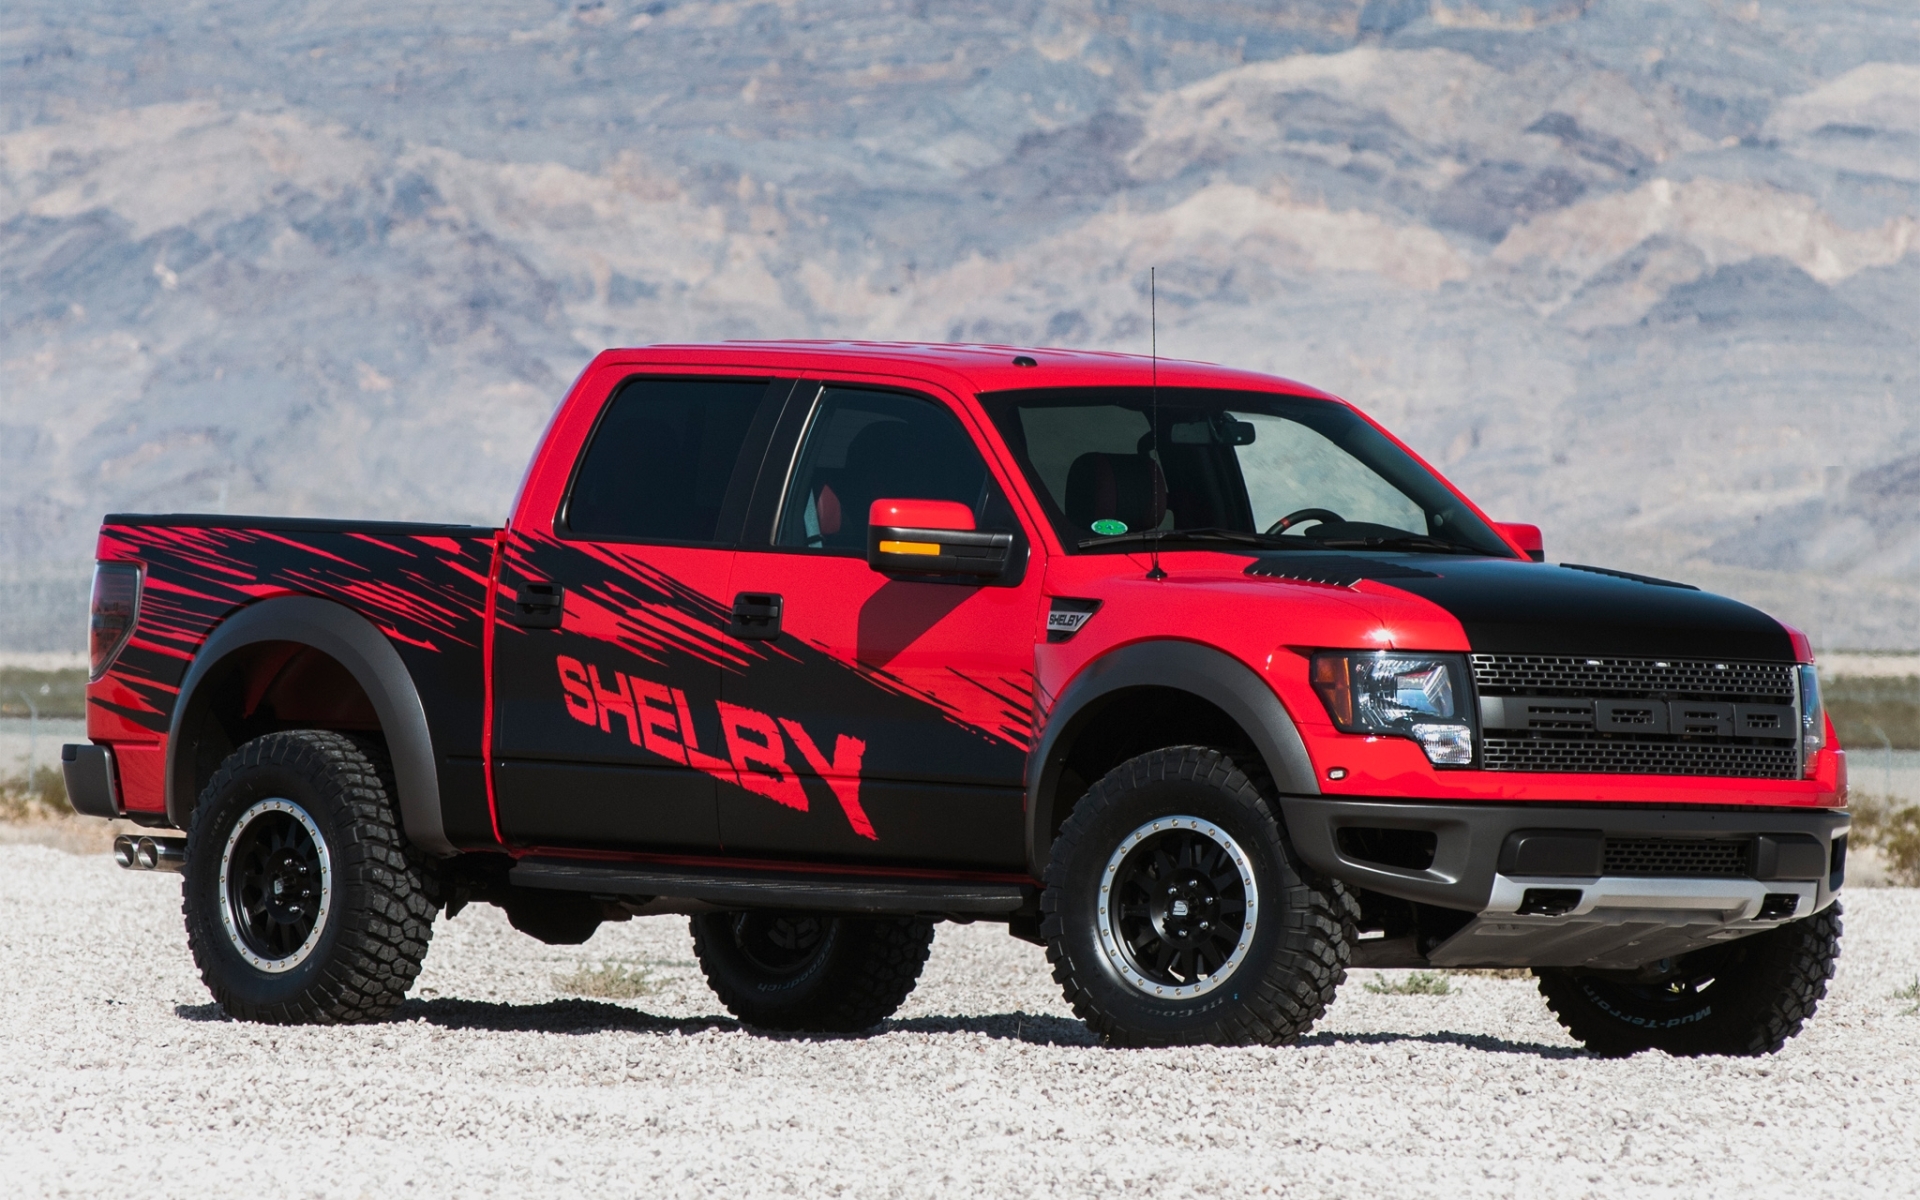 Ford Shelby Pickup Truck - Ford F 150 Raptor Shelby Super Snake , HD Wallpaper & Backgrounds